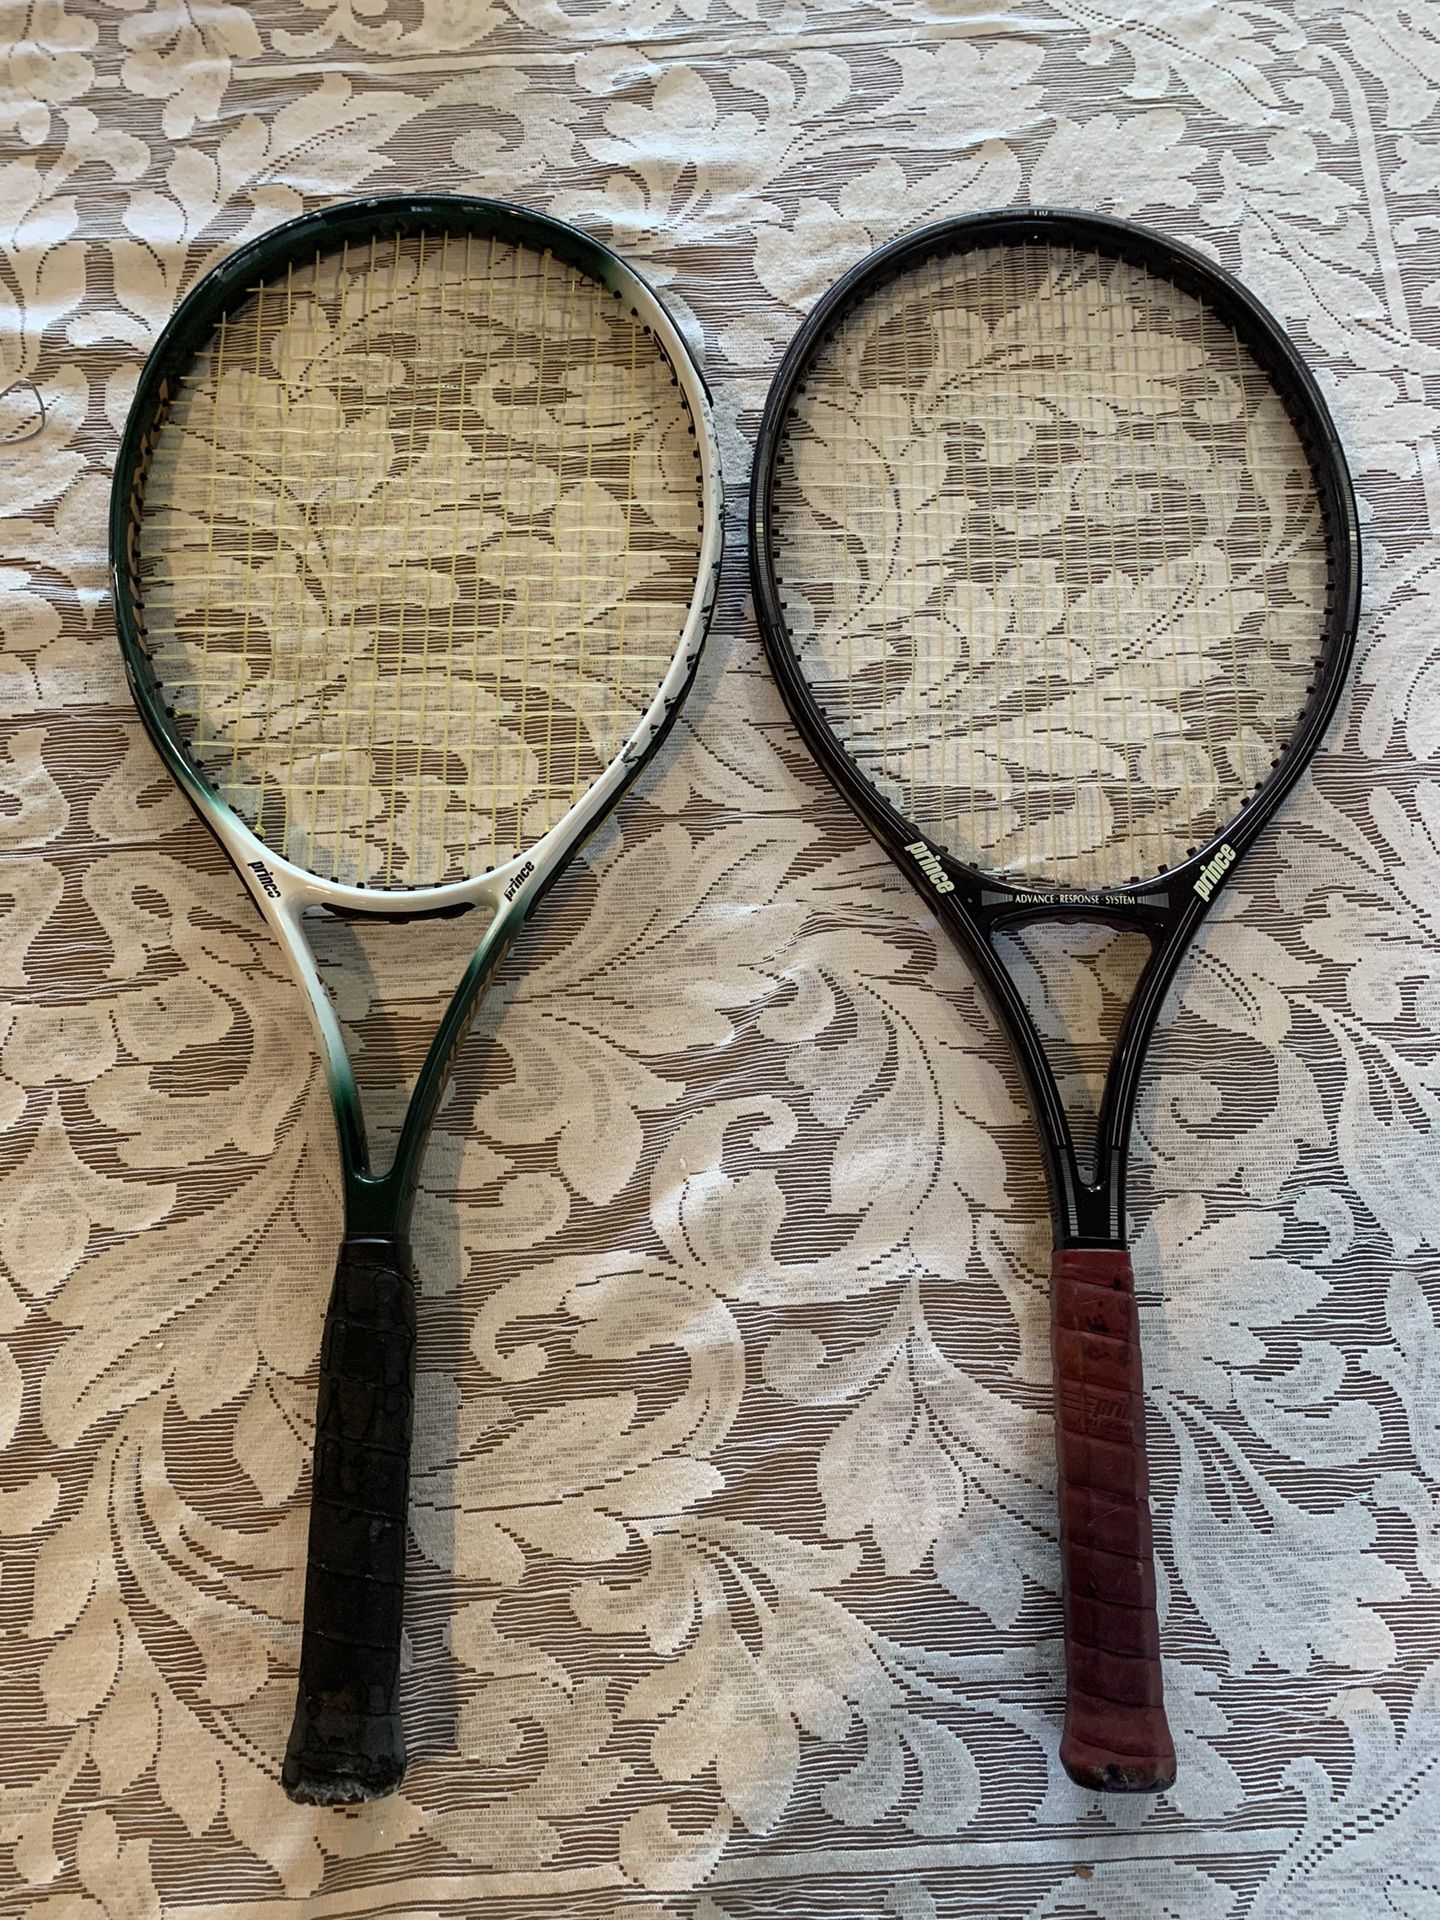 Two Prince tennis rackets